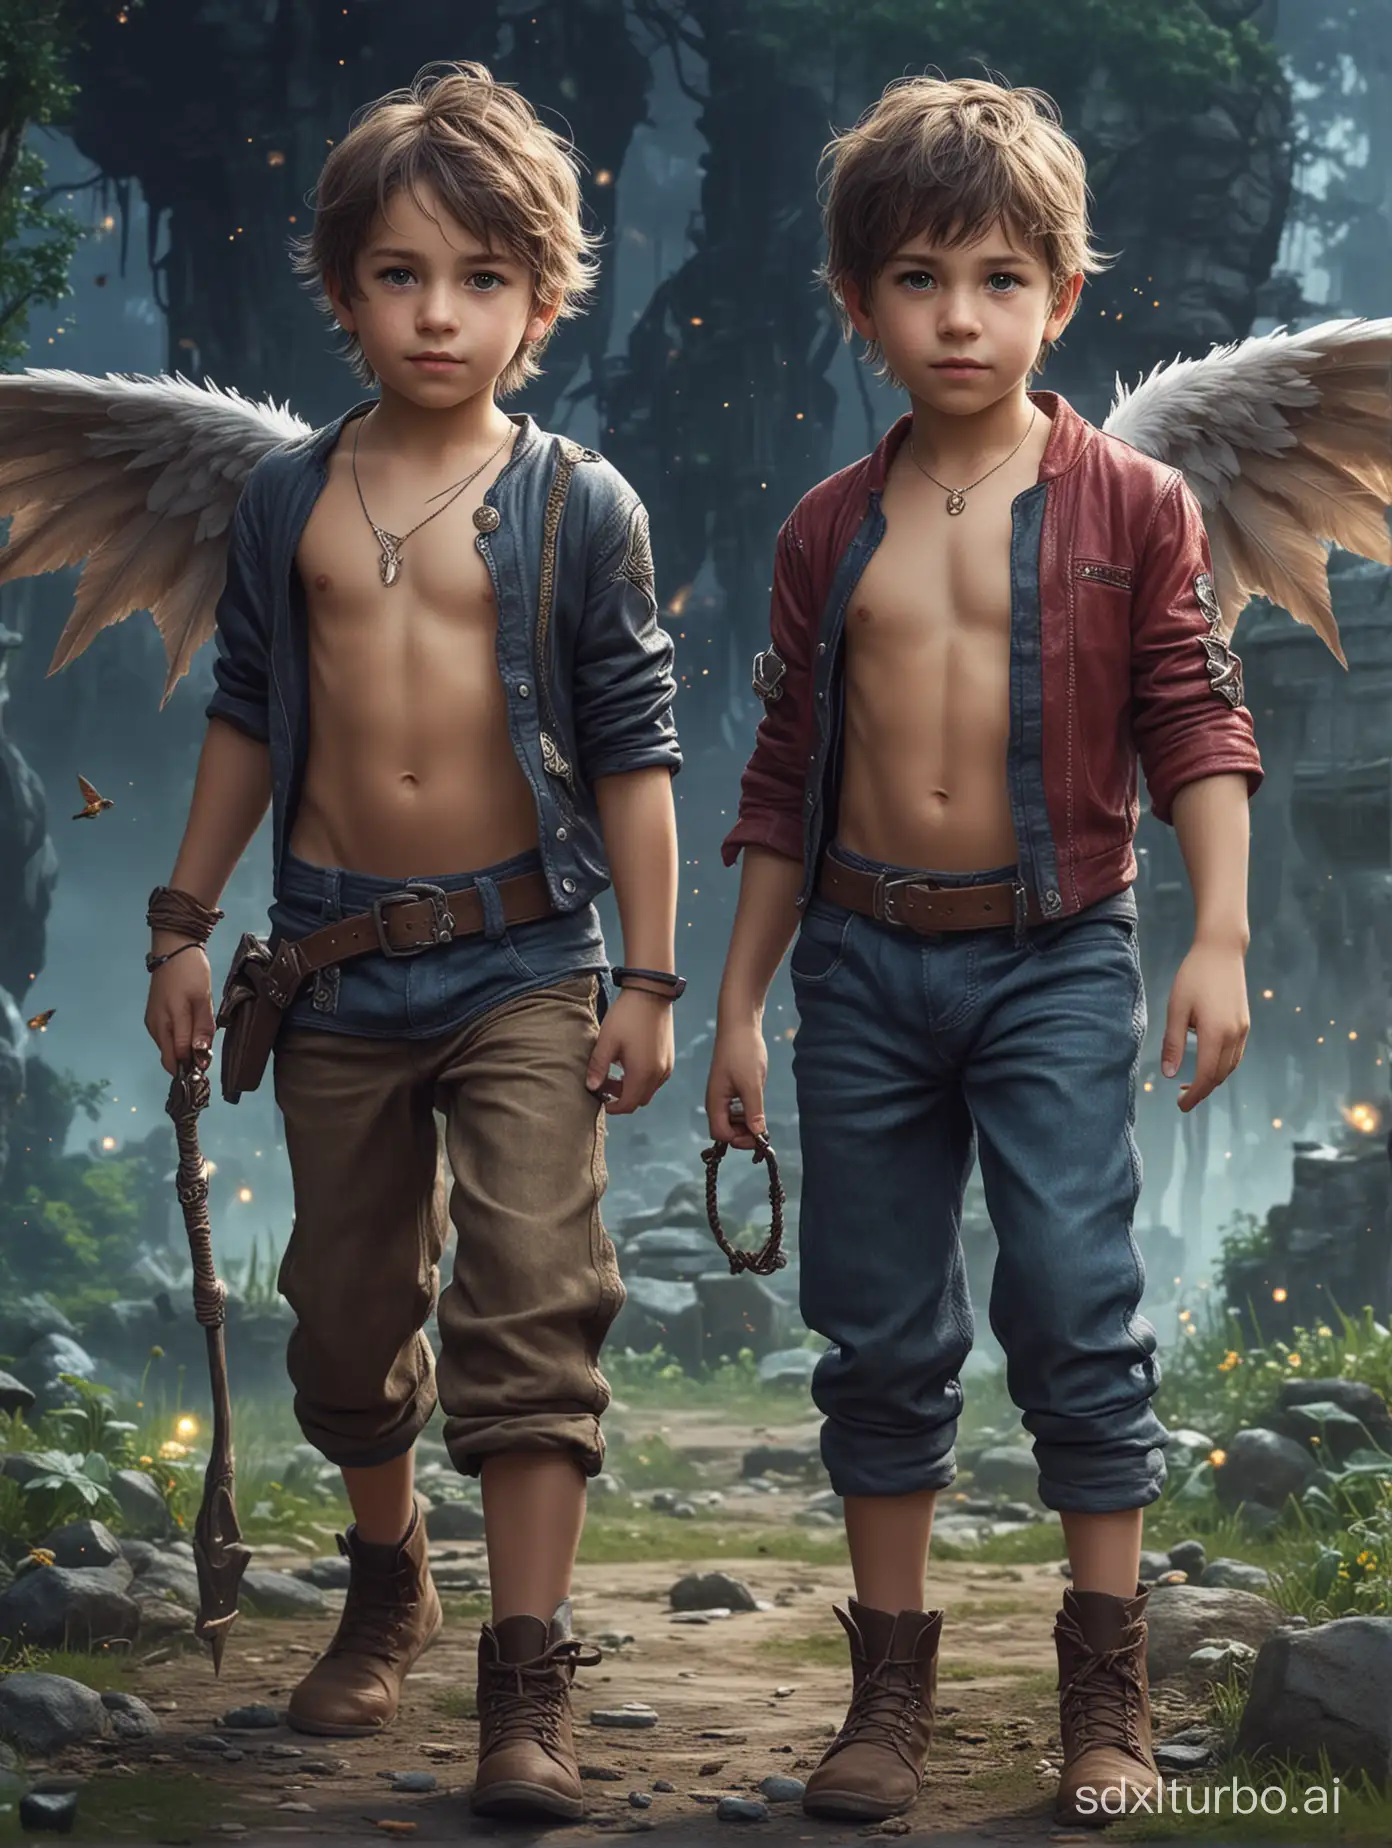 Young-Boys-Embracing-Magic-in-an-Enchanted-Forest